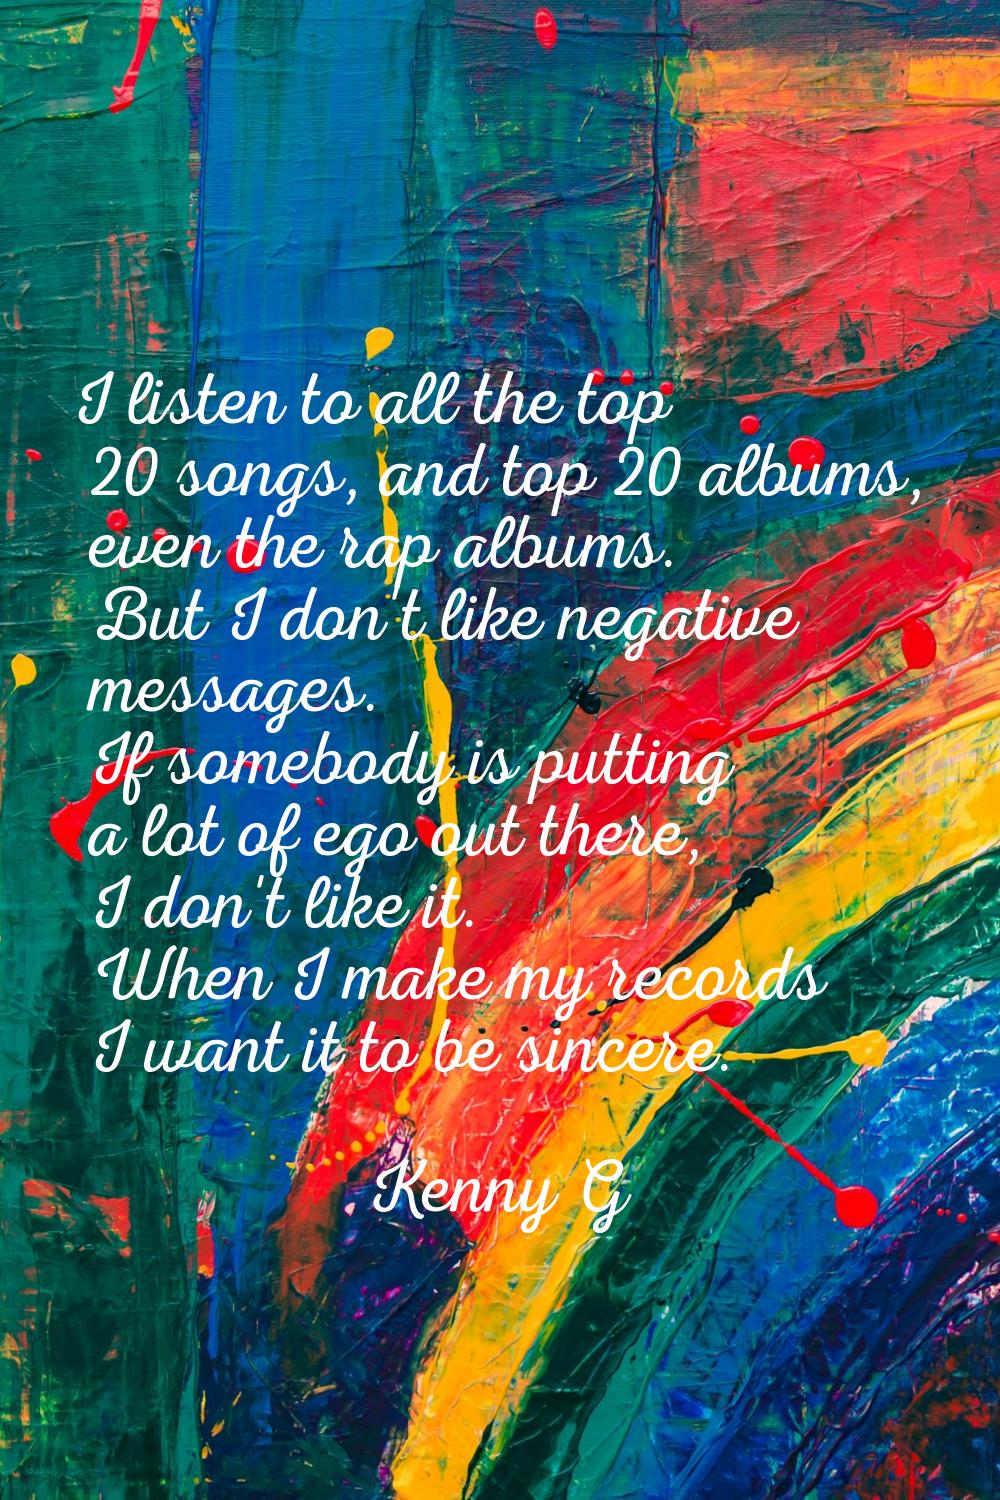 I listen to all the top 20 songs, and top 20 albums, even the rap albums. But I don't like negative